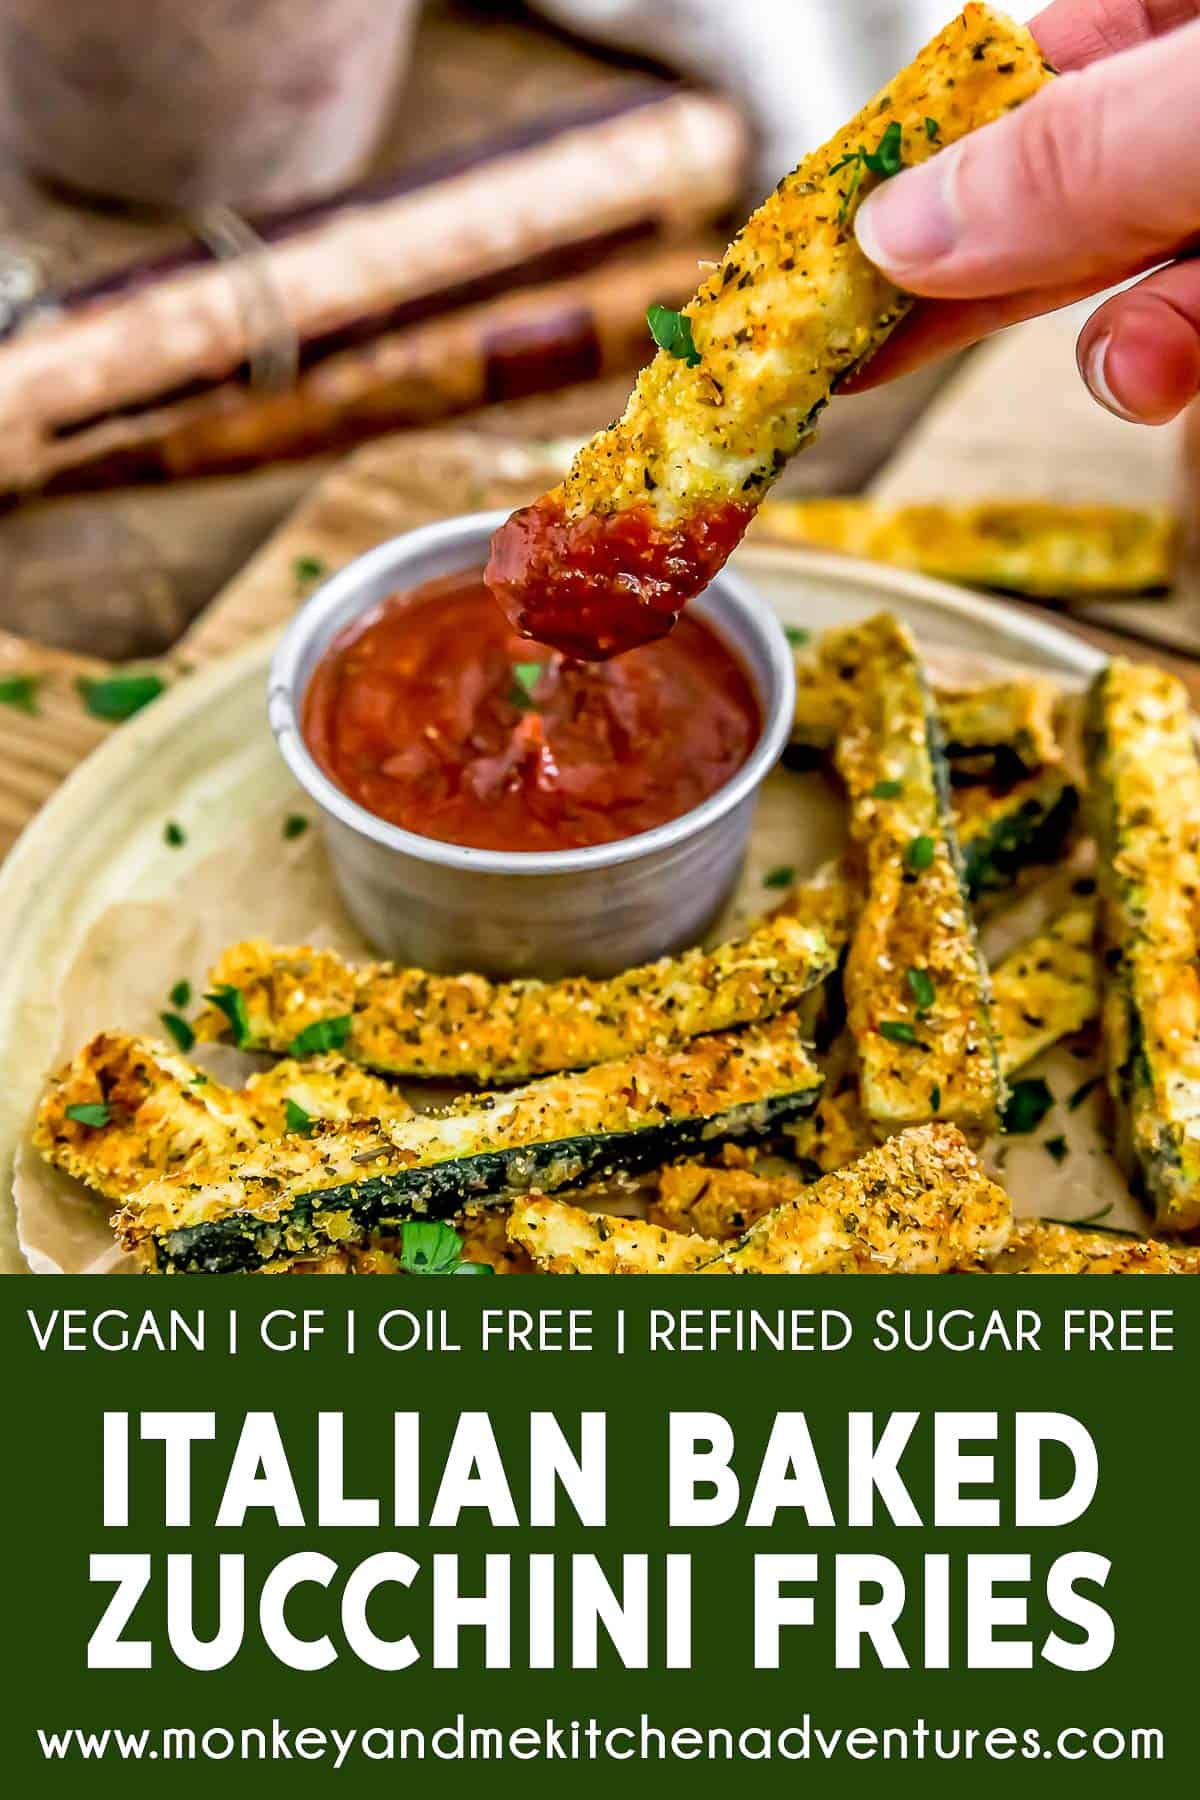 Italian Baked Zucchini Fries with text description